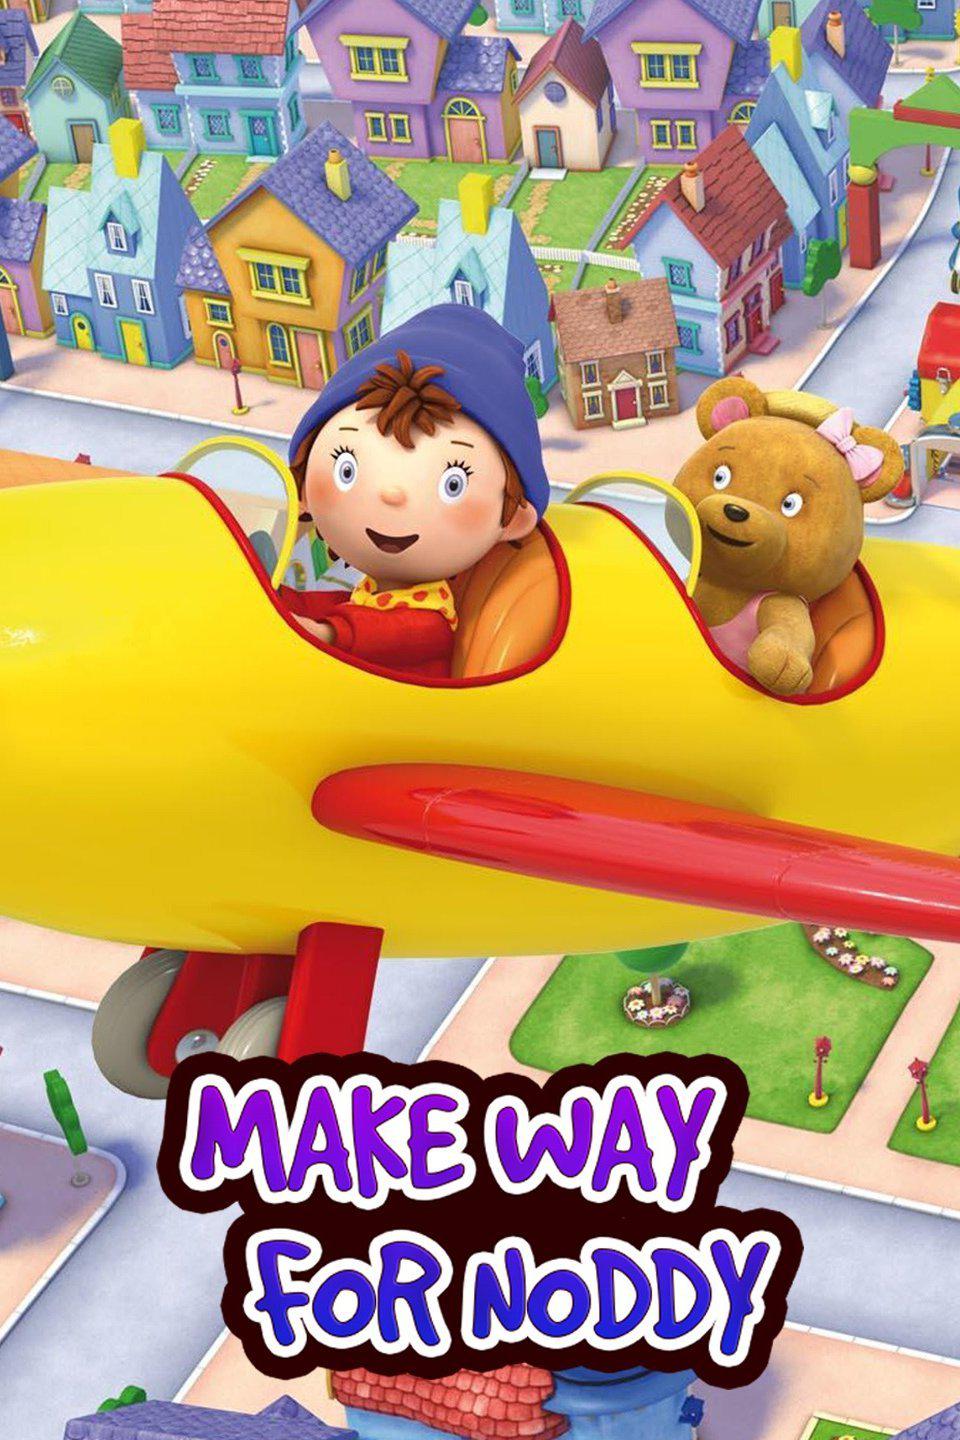 TV ratings for Make Way For Noddy in Francia. PBS Kids TV series